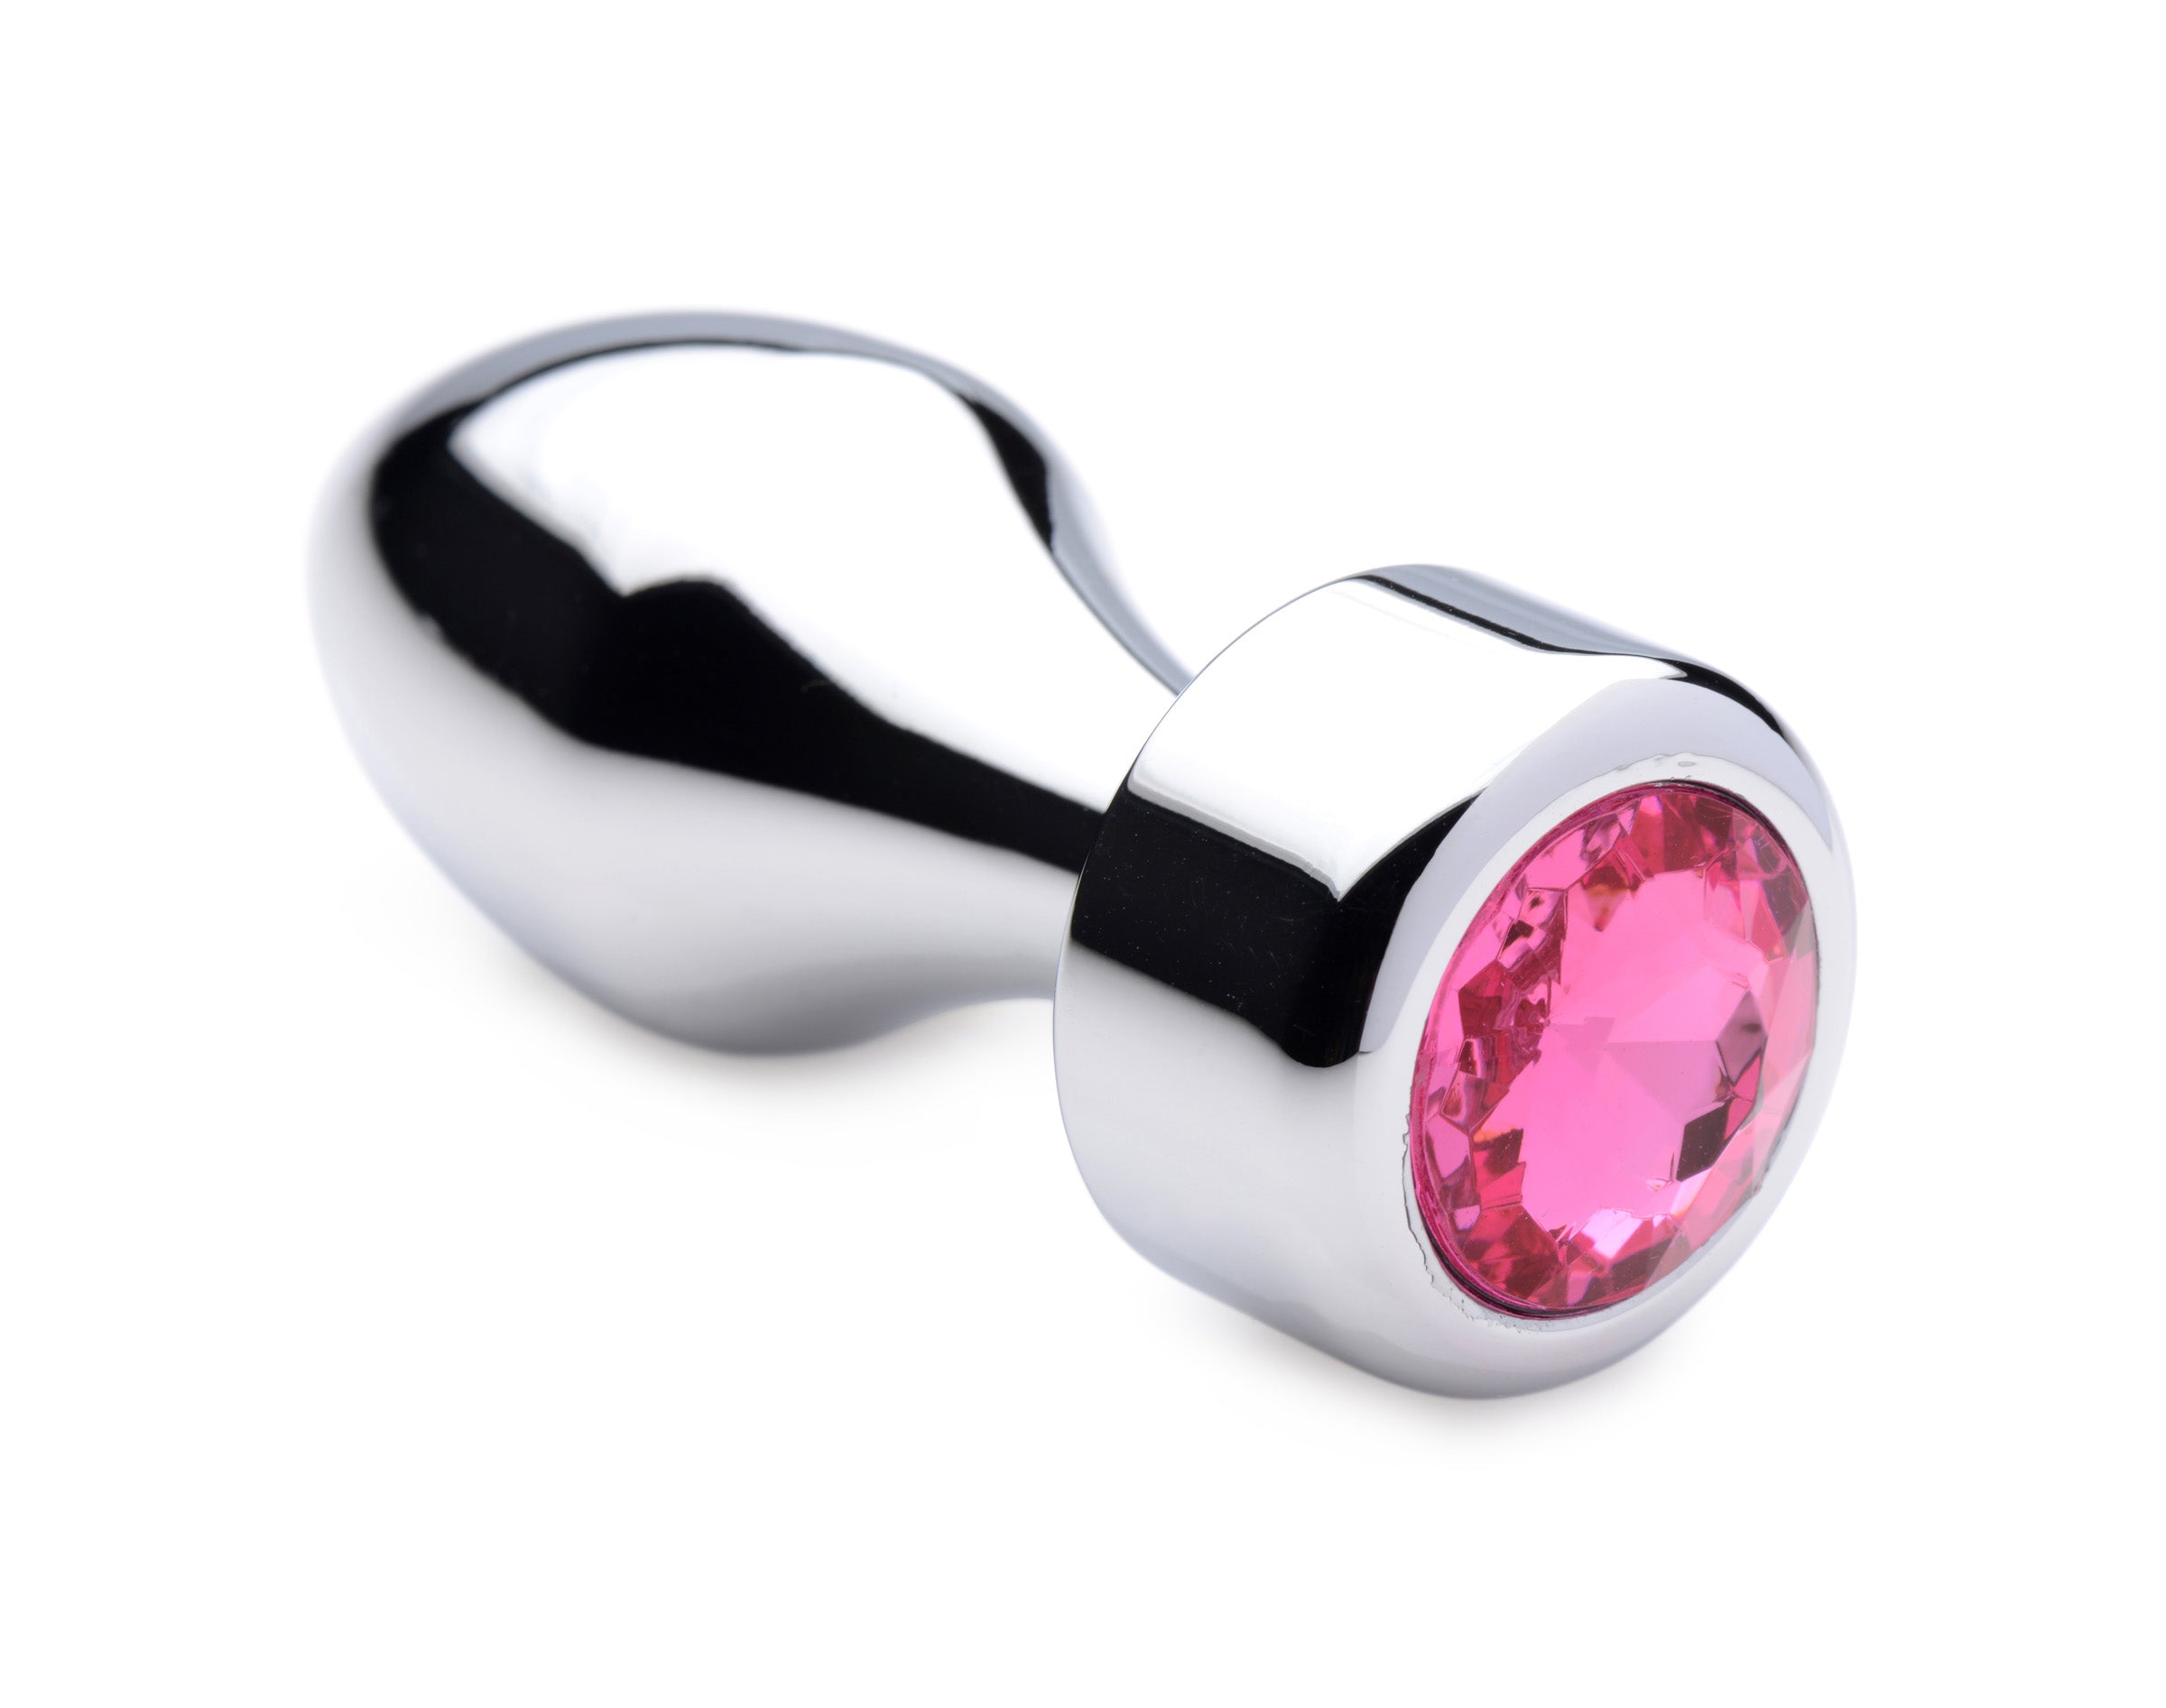 Hot Pink Gem Weighted Anal Plug